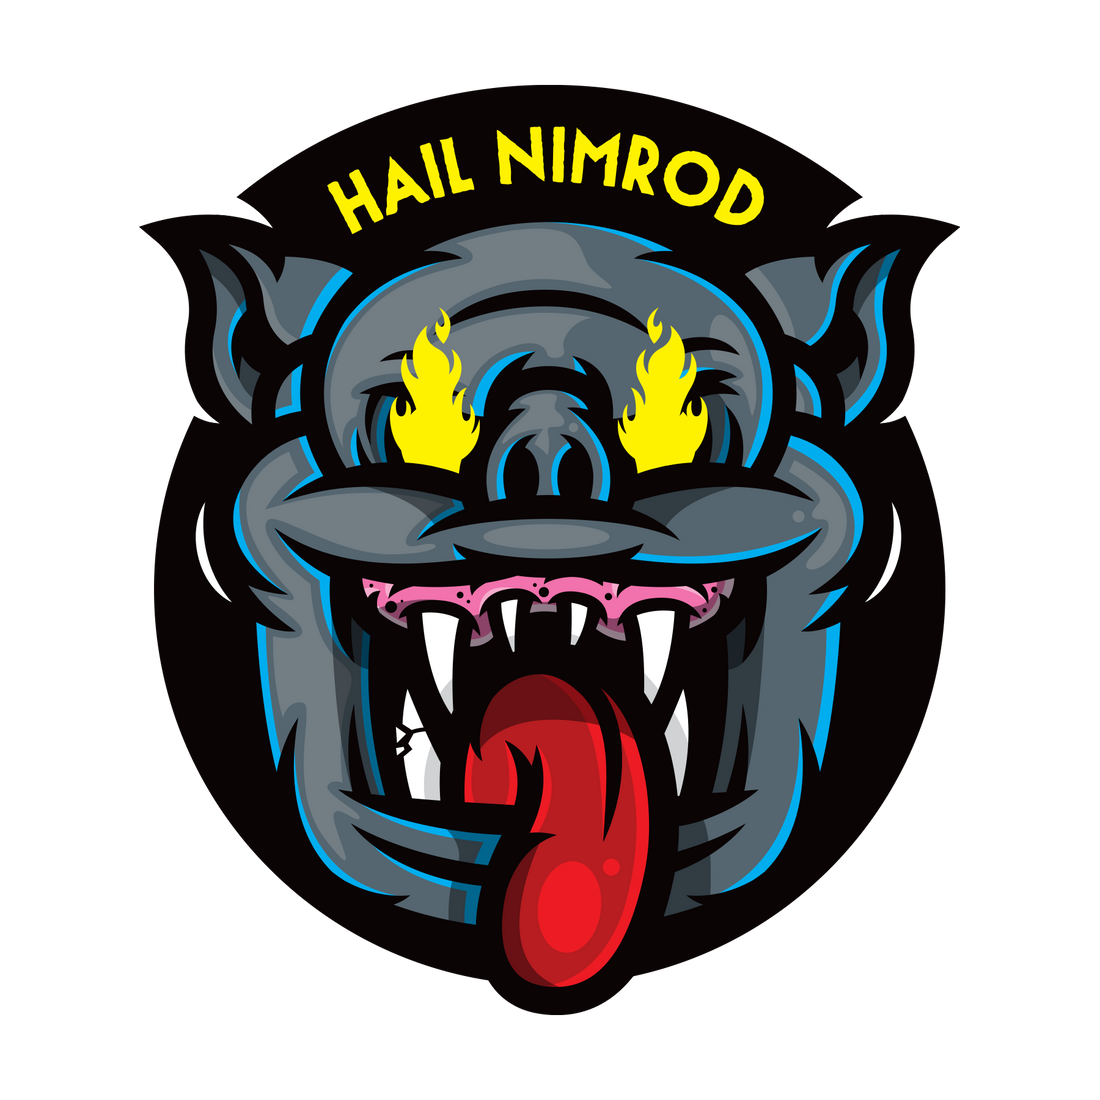 Hail Nimrod! (Kid Voice) Ringtone! (mp3 for Android users)